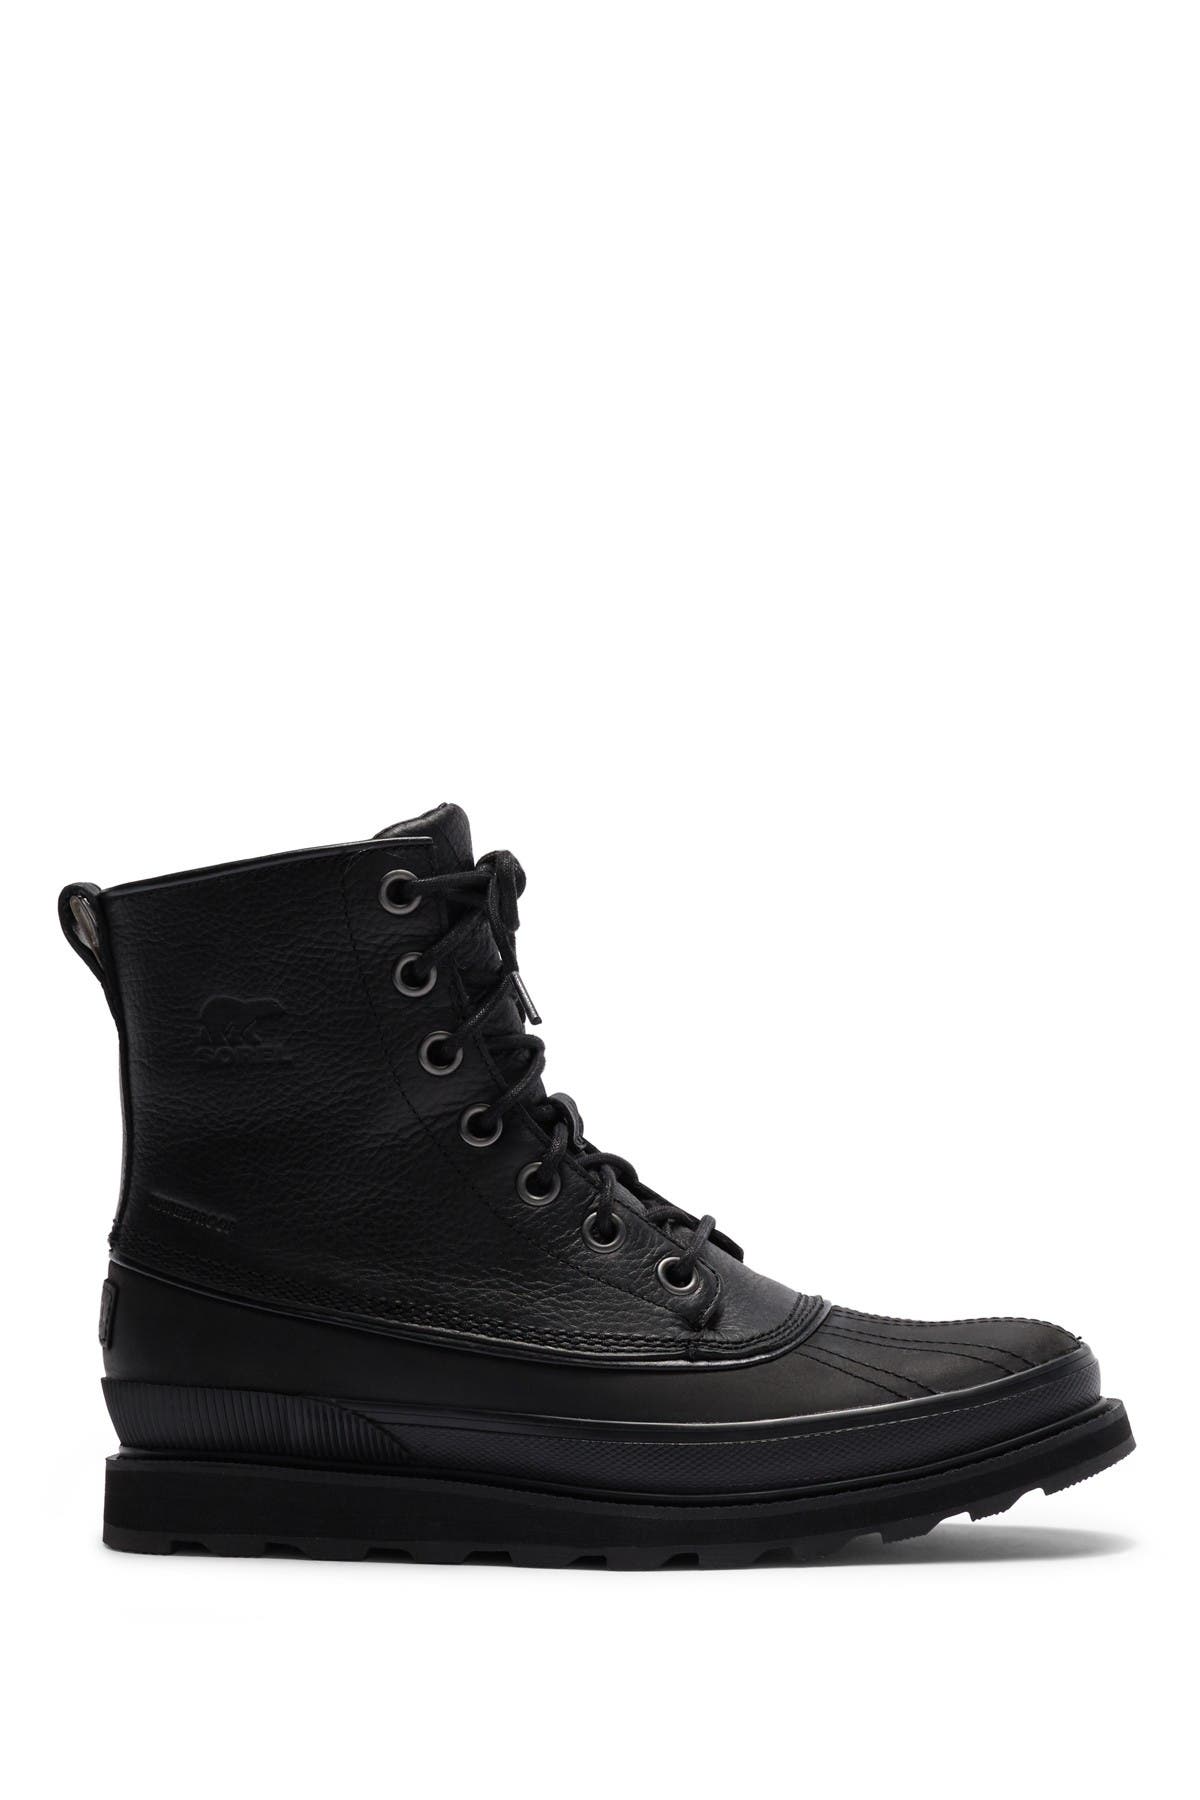 madson 1964 waterproof leather boot